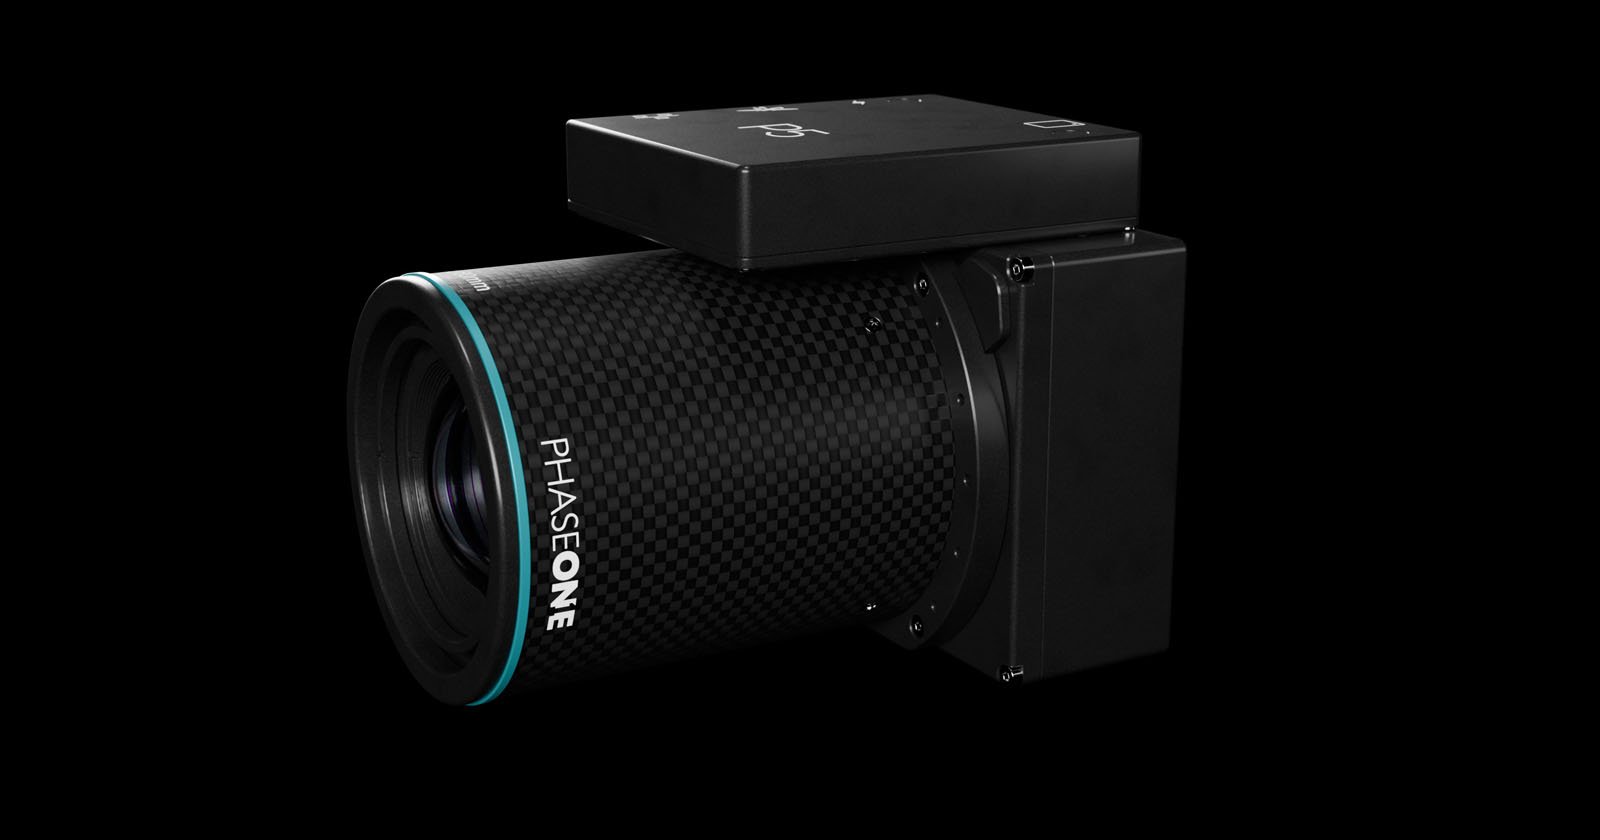 The Phase One P5 is a 128-Megapixel Medium Format Camera Built for Drones